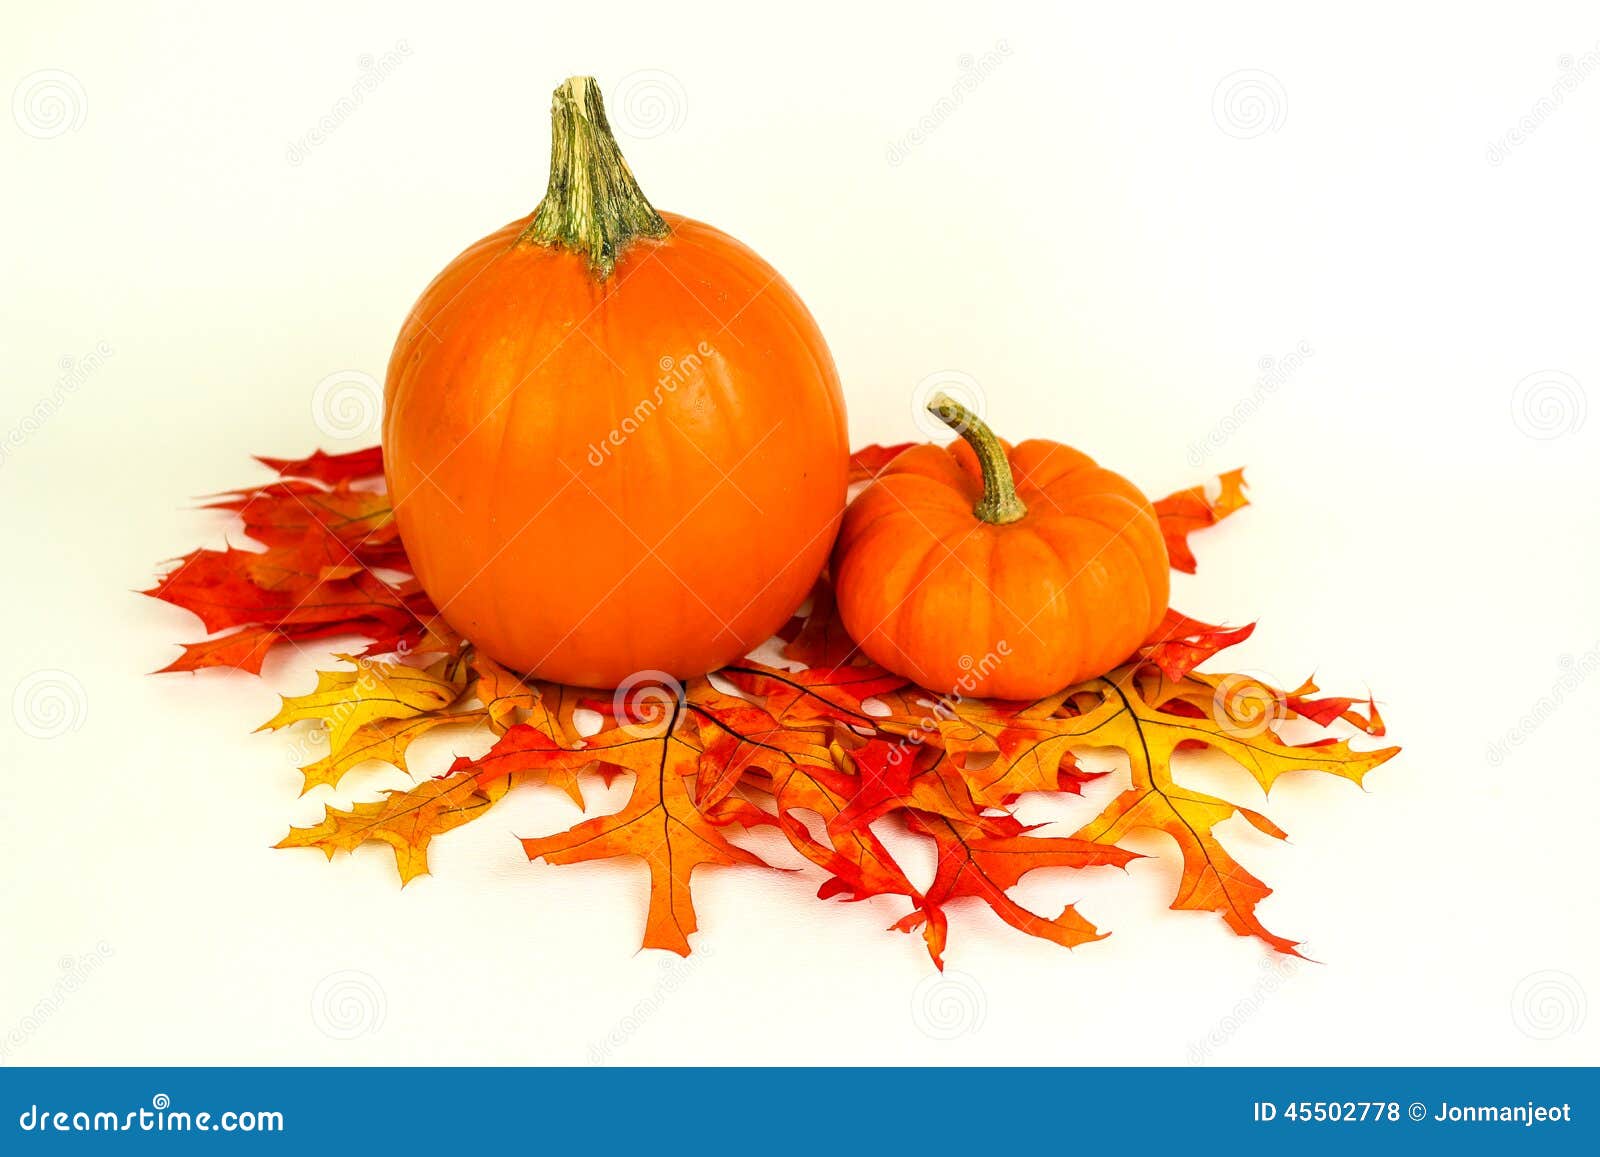 Fall Harvest and Mini Pumkins Stock Photo - Image of candle, family ...